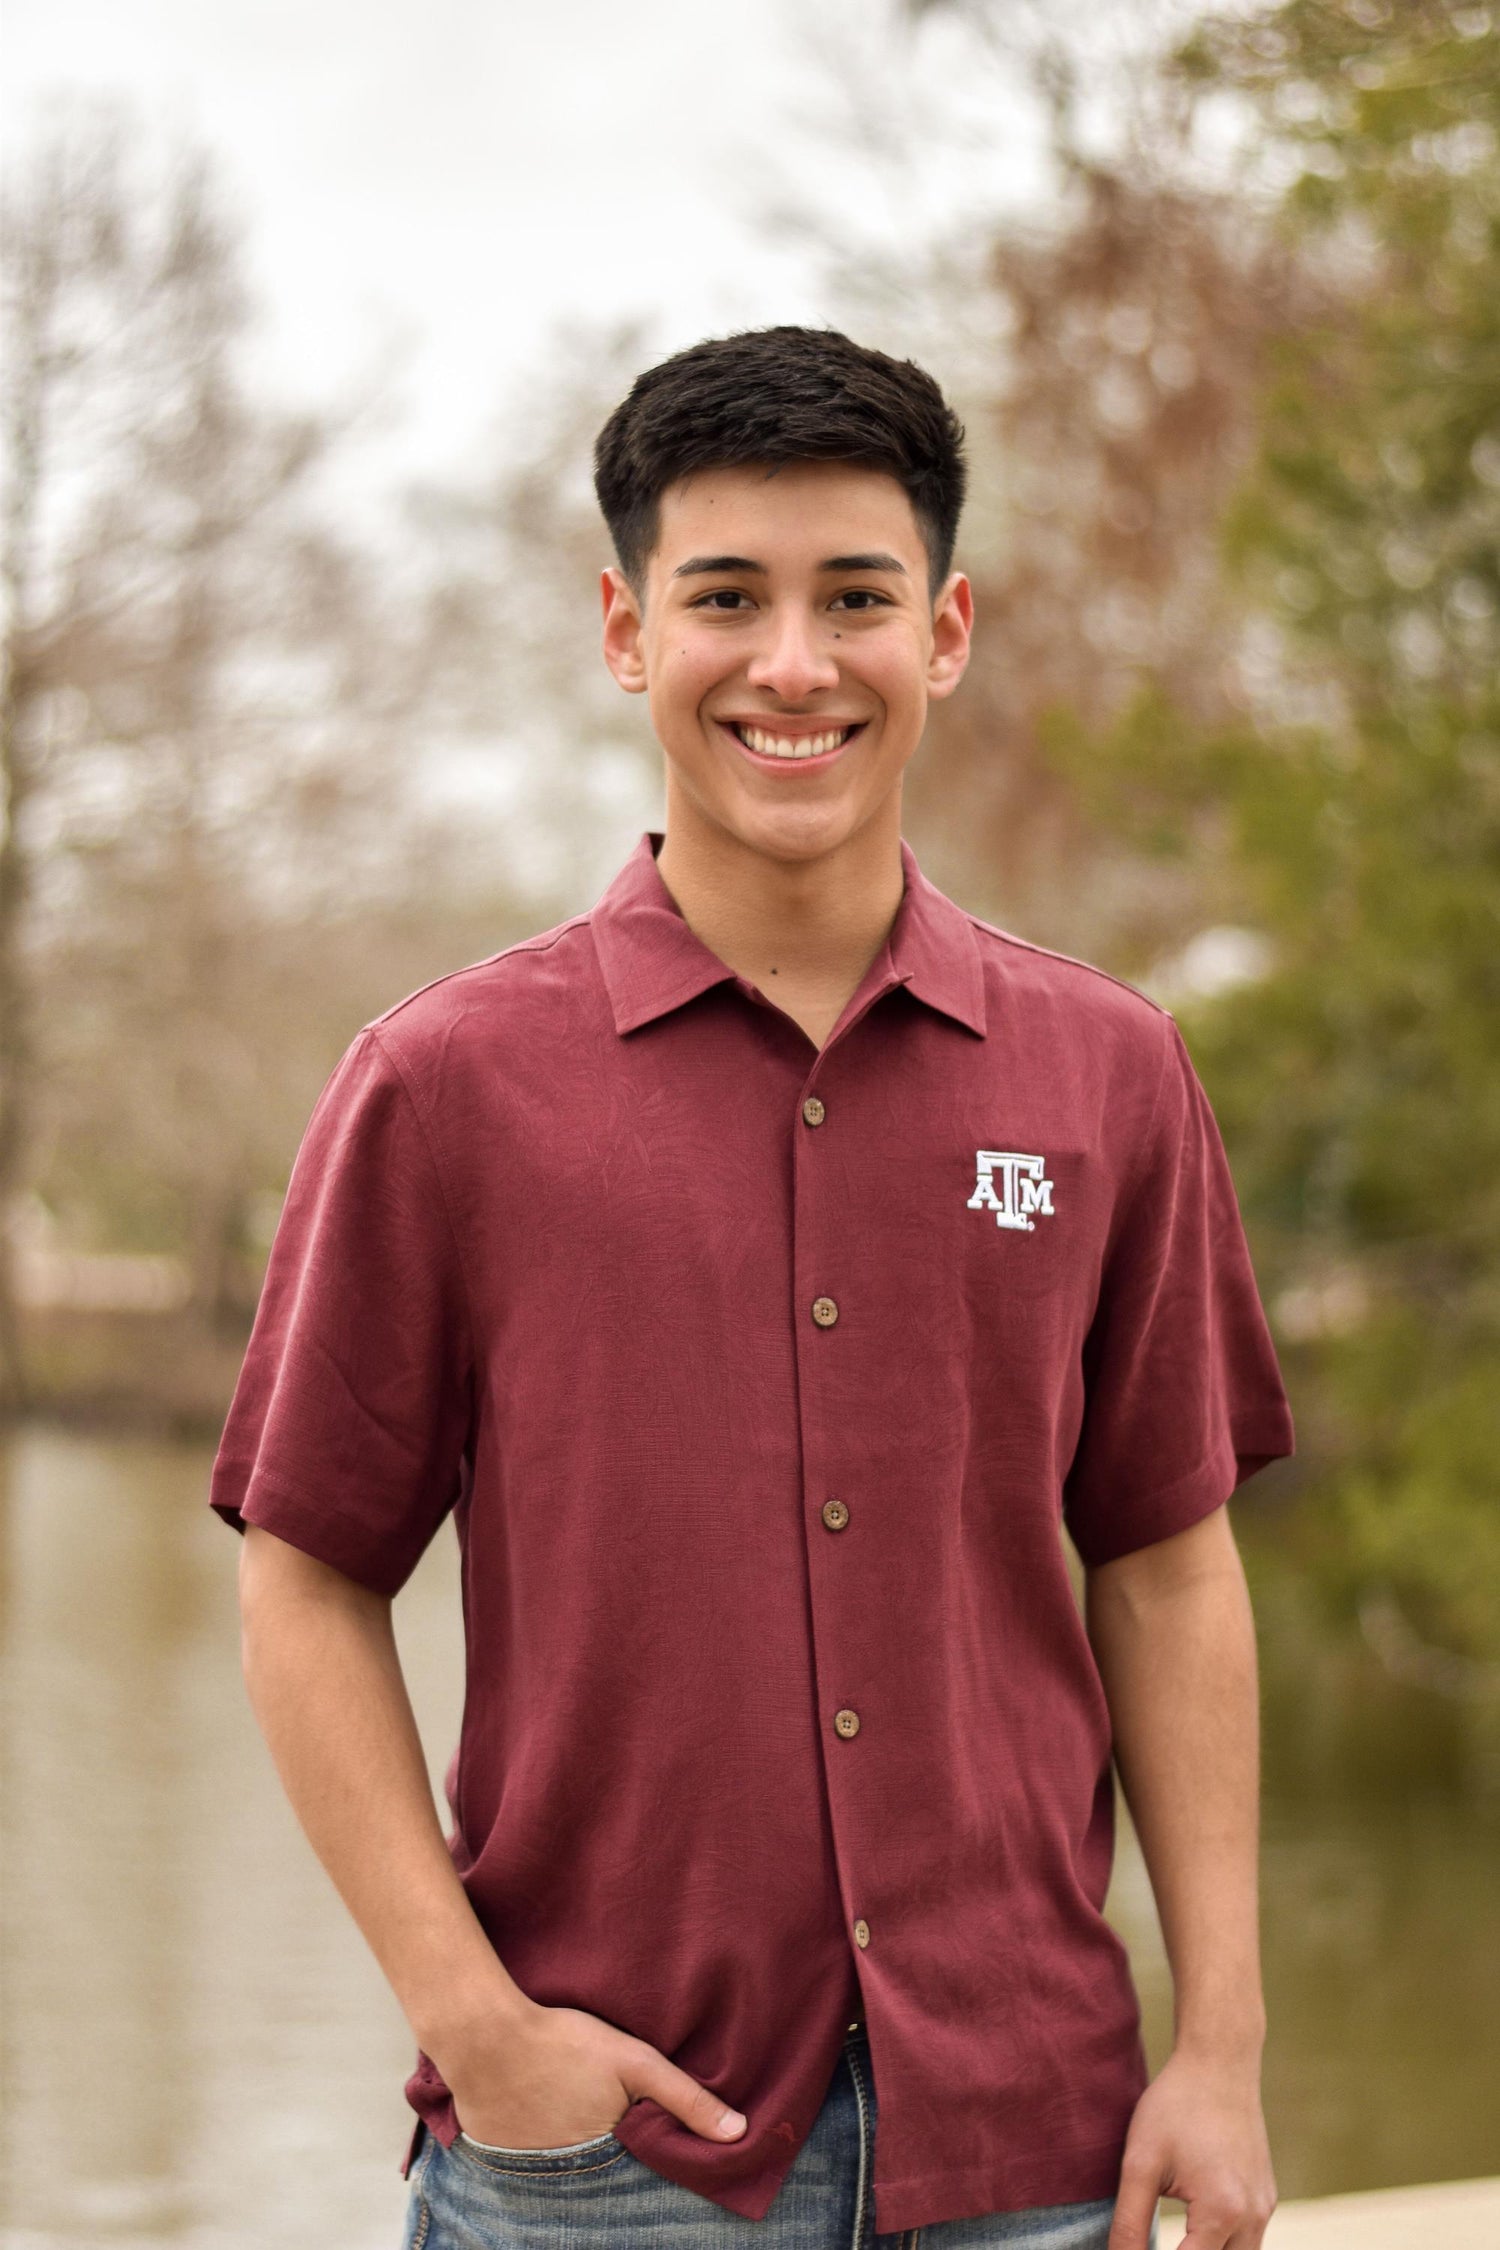 Texas A&M Tommy Bahamas Sport Tropical Maroon Button Down